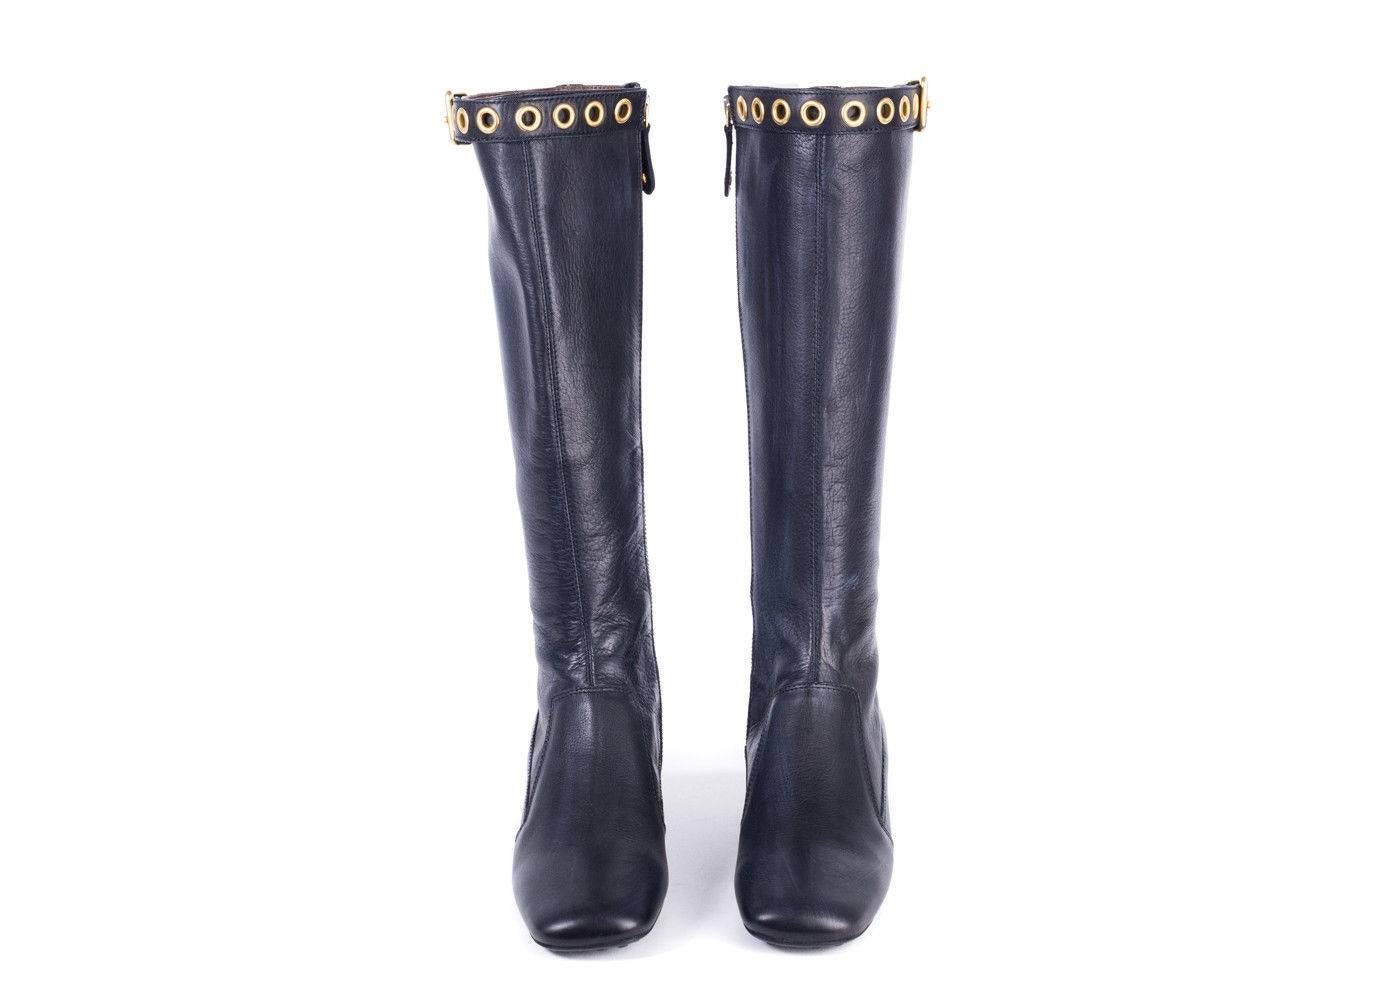 Brand New Car Shoe Tall Boots
Original Box Included
Retails in Stores & Online for $785
Size IT37.5 / US7.5 Fits True to Size

Car Shoe's rendition of a pair of classic black tall mid calf boots for this fall season. The boots feature gold buckle